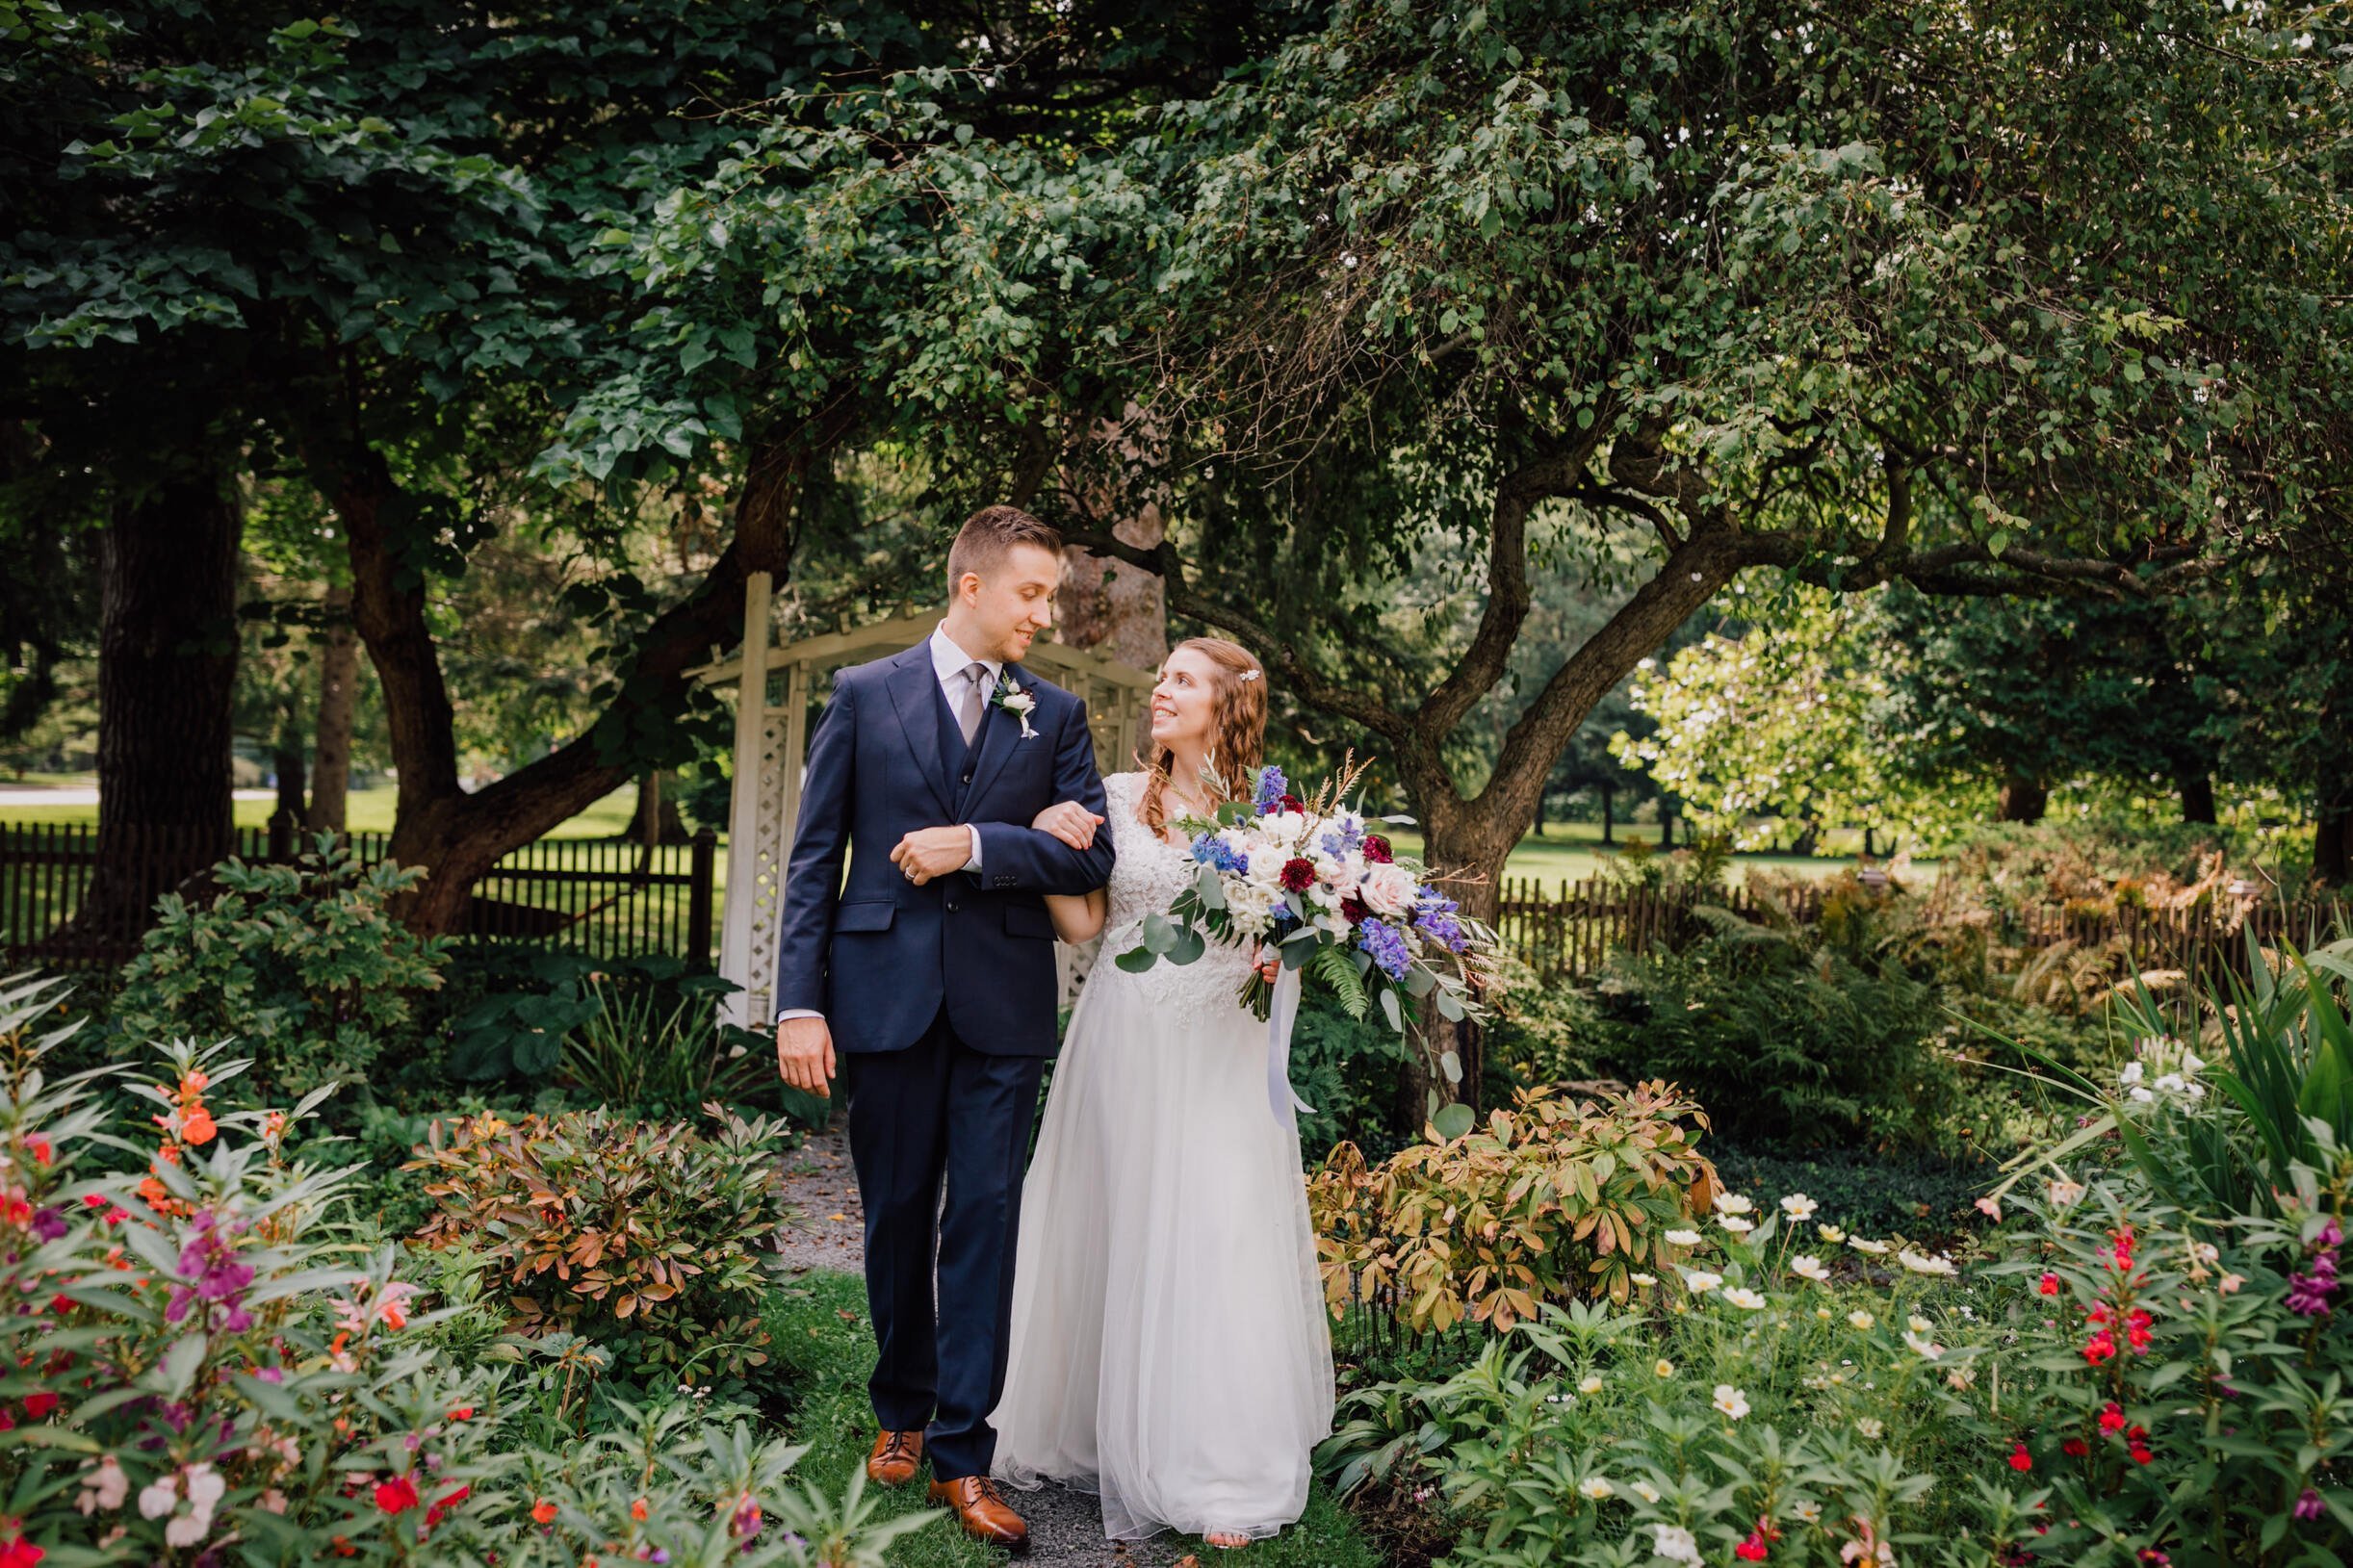  bride and groom look at each other among flowers at their new york garden wedding 